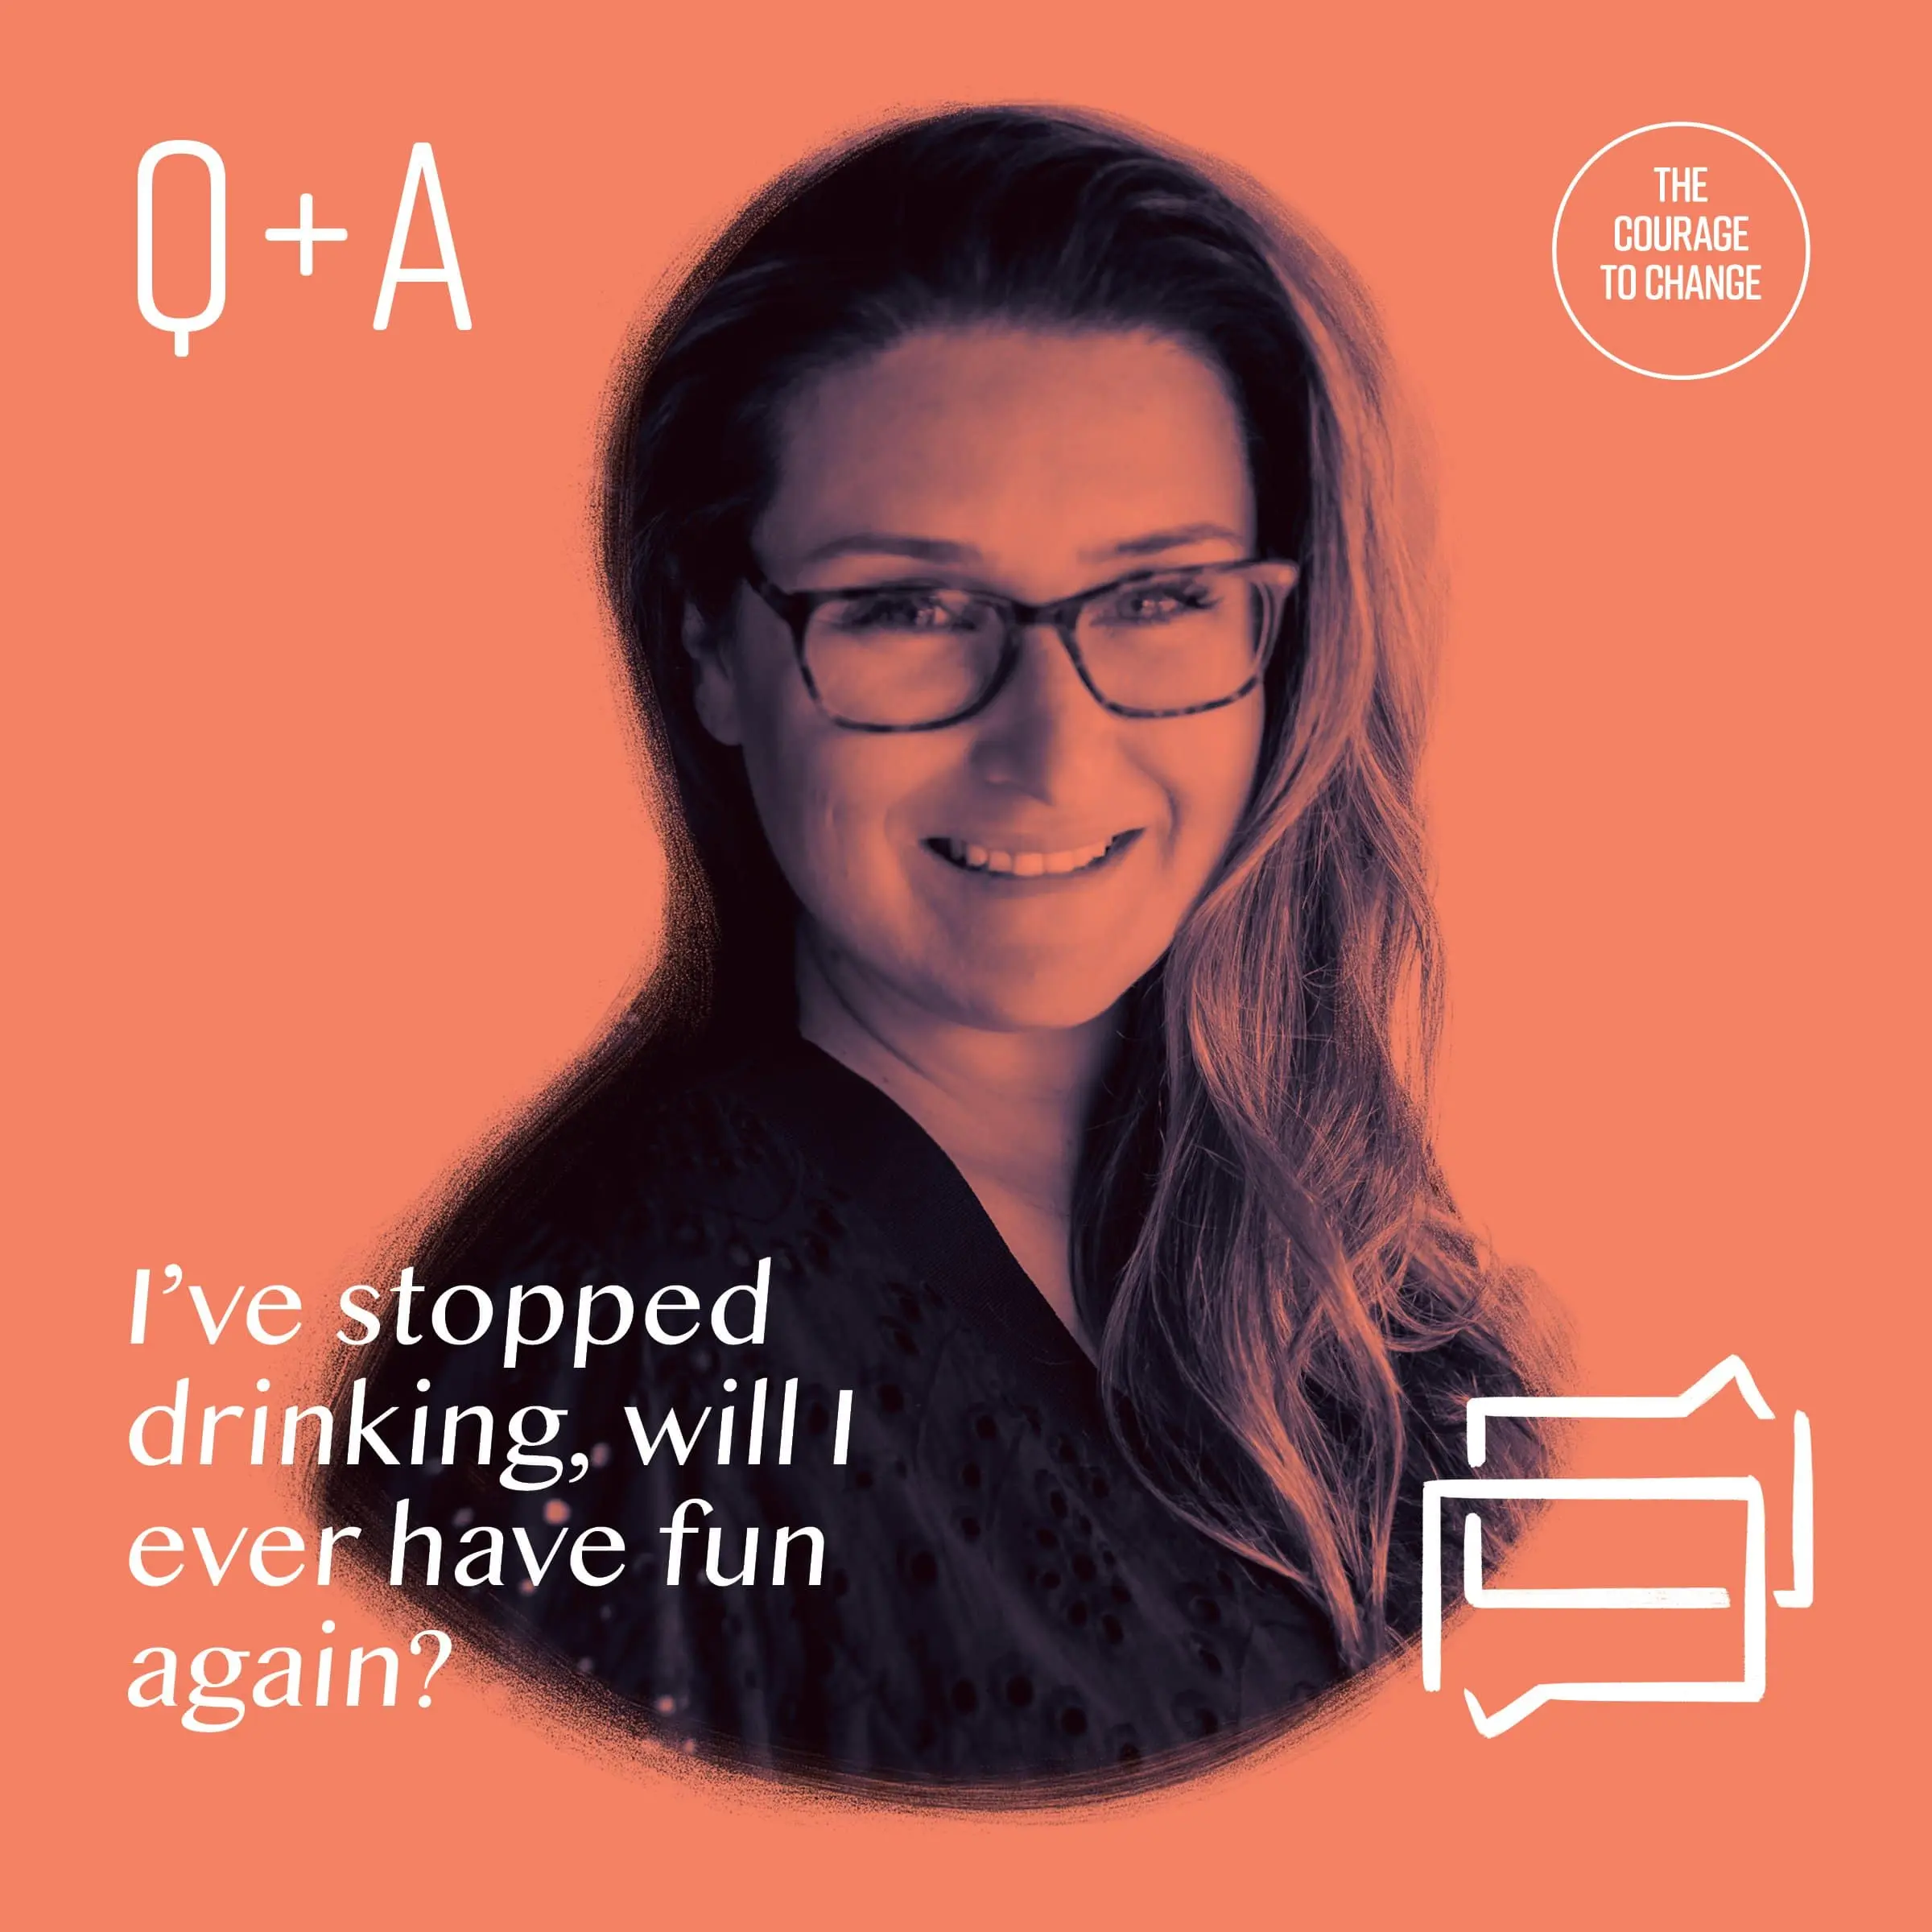 Q+A I’ve Stopped Drinking, Will I Ever Have Fun Again?